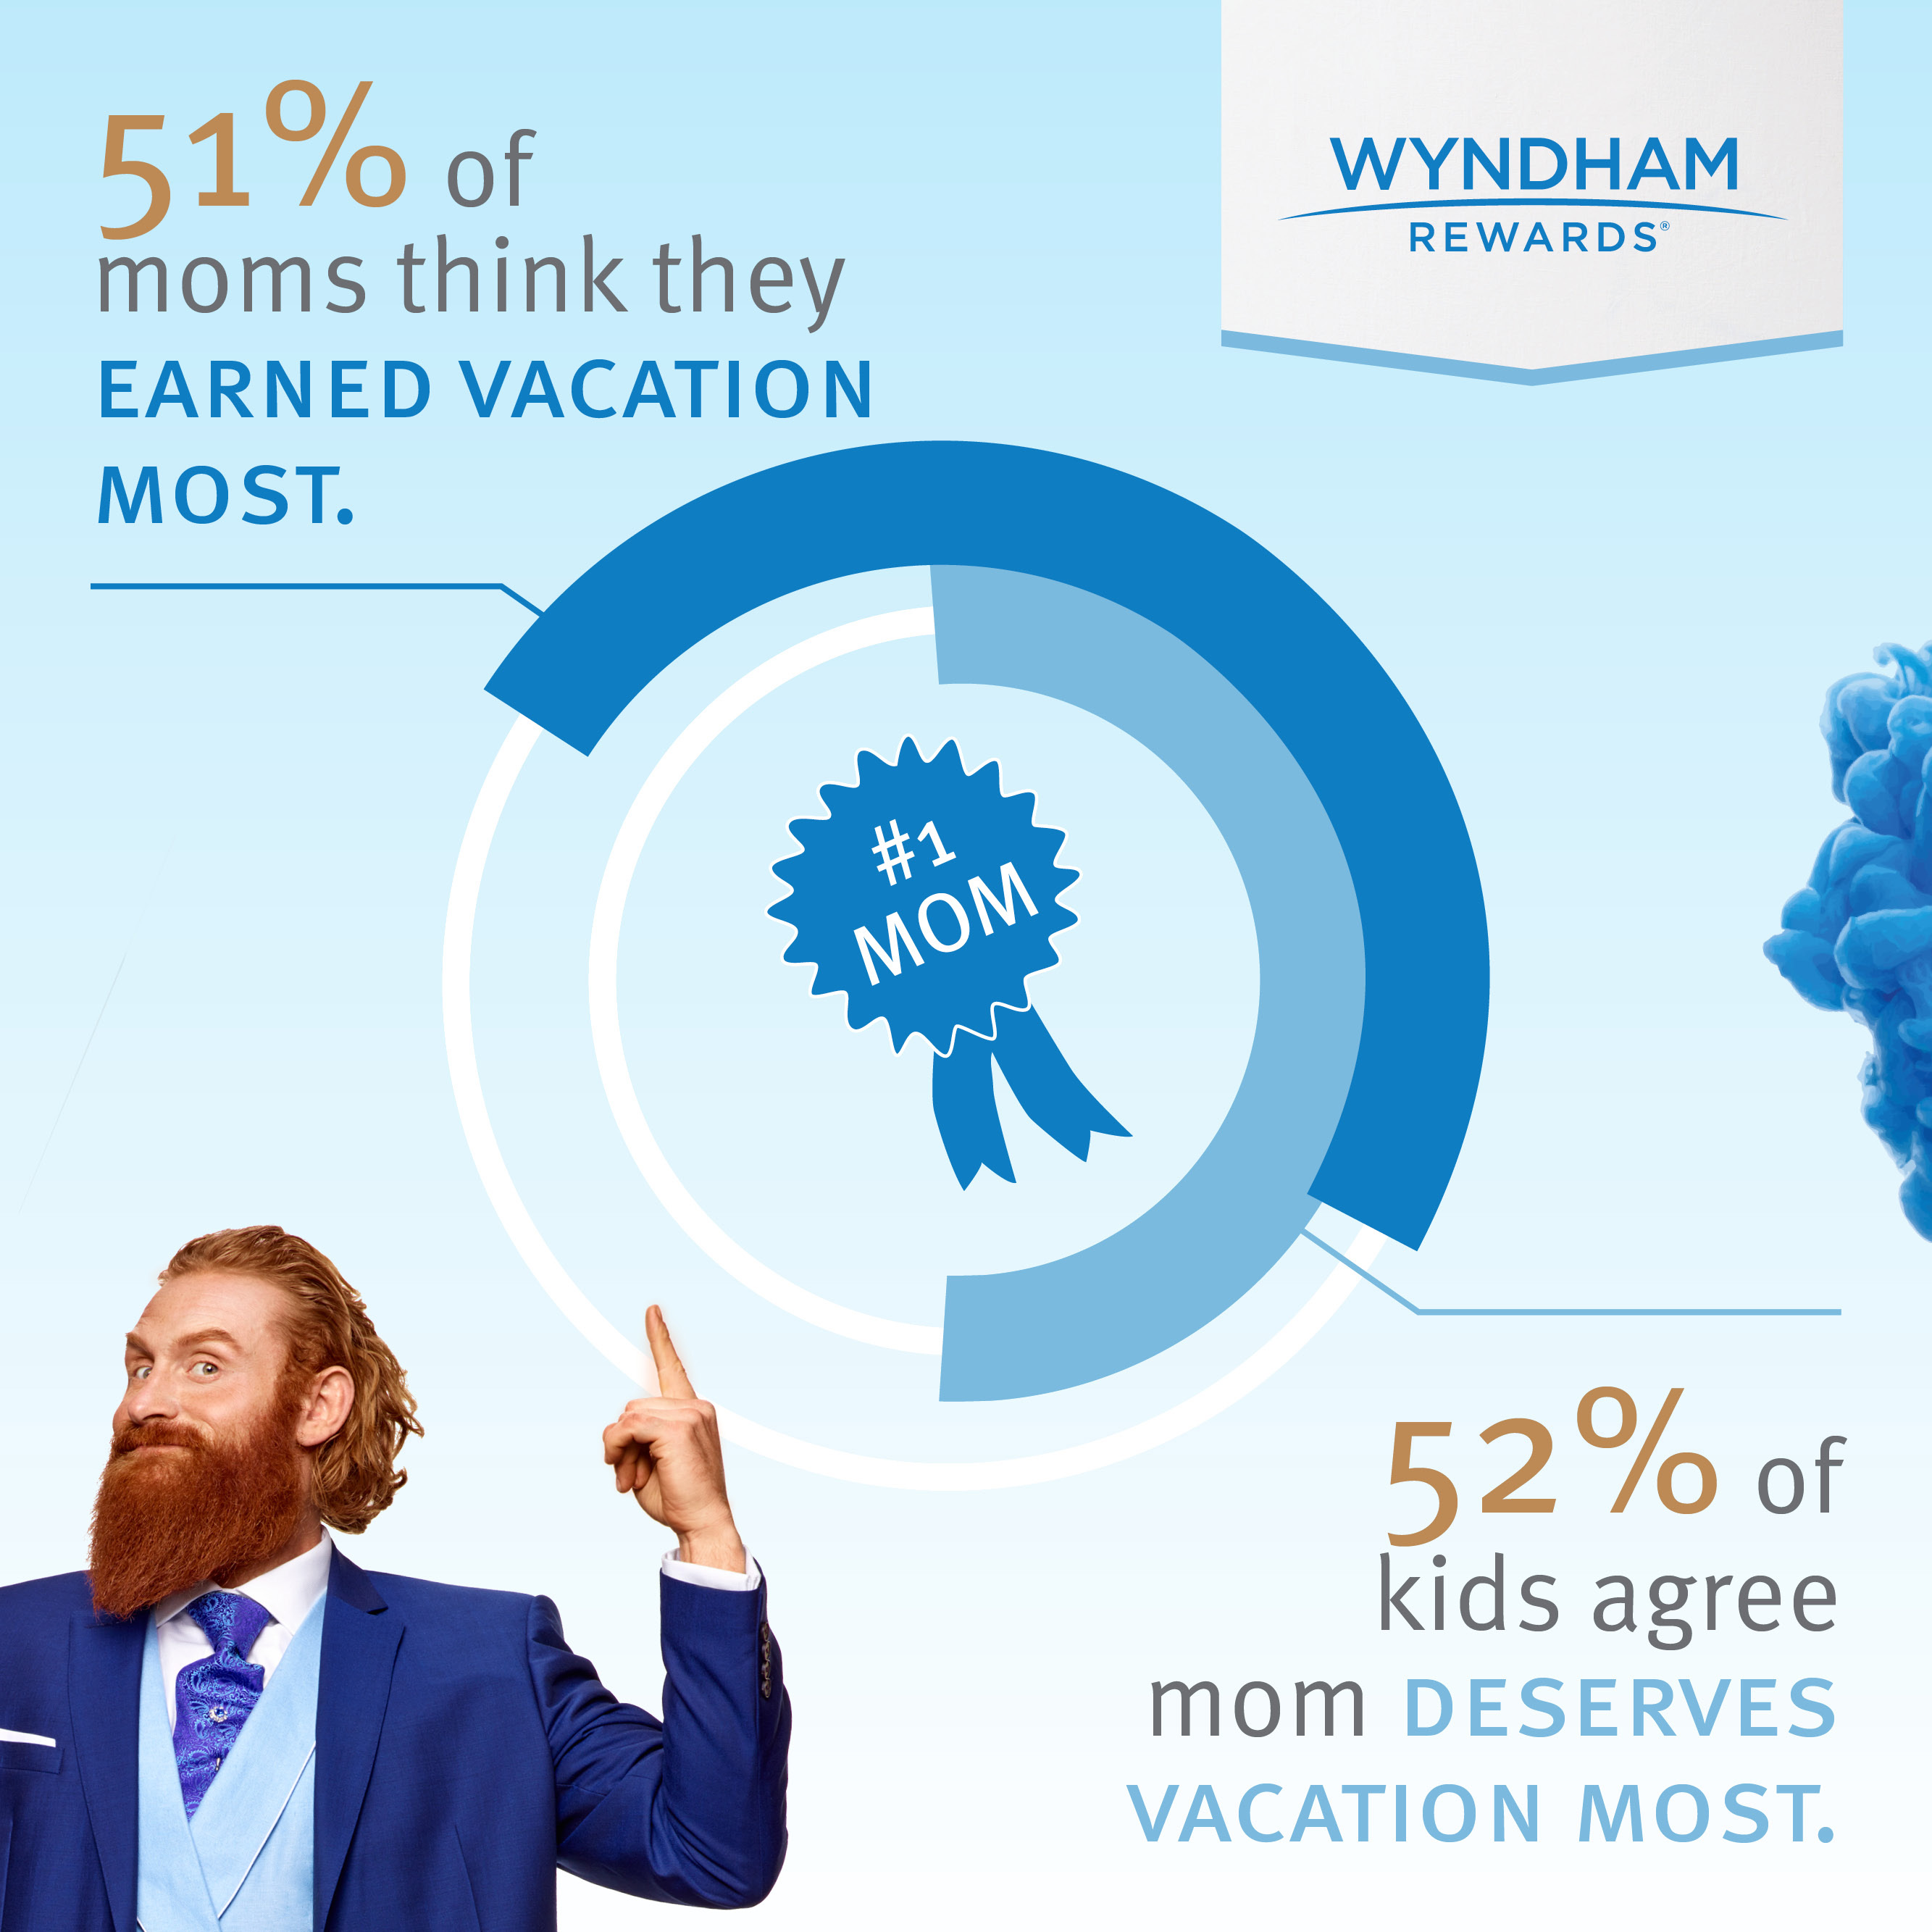 A new national survey by Wyndham Rewards found that 52% of kids agree mom deserves a vacation more than anybody else in the family. 